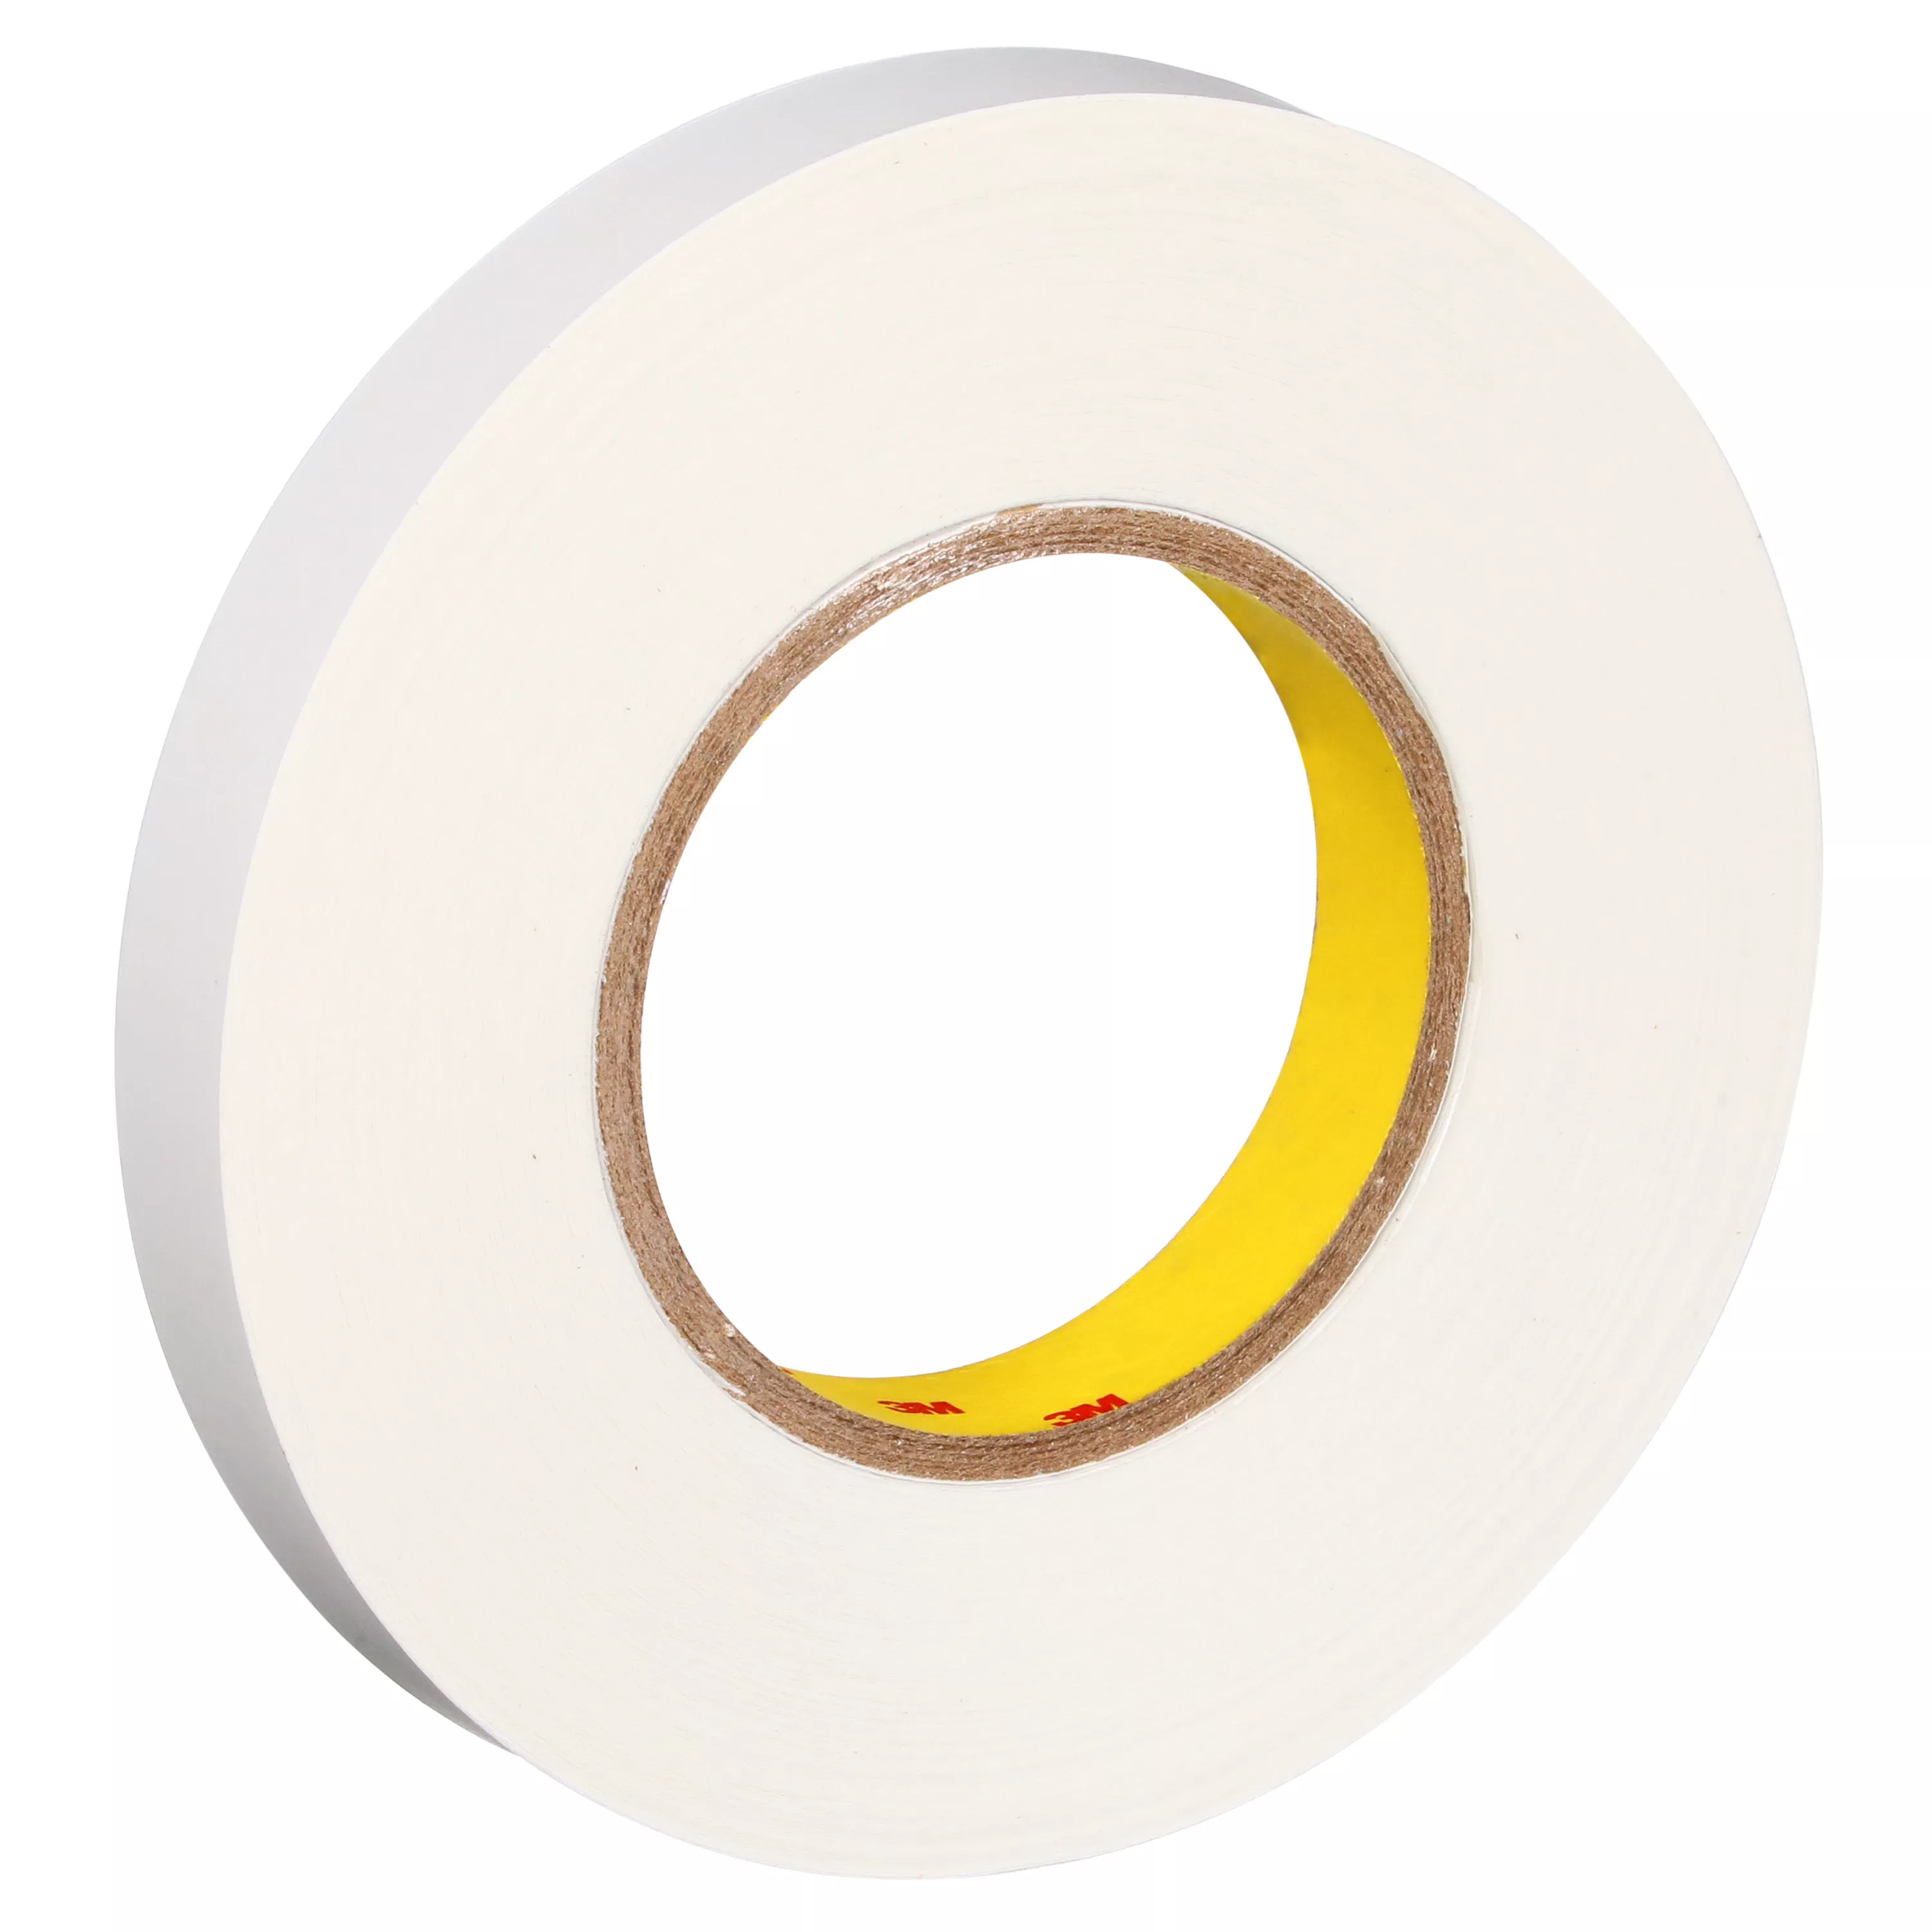 SKU 7000048707 | 3M™ Removable Repositionable Tape 9415PC